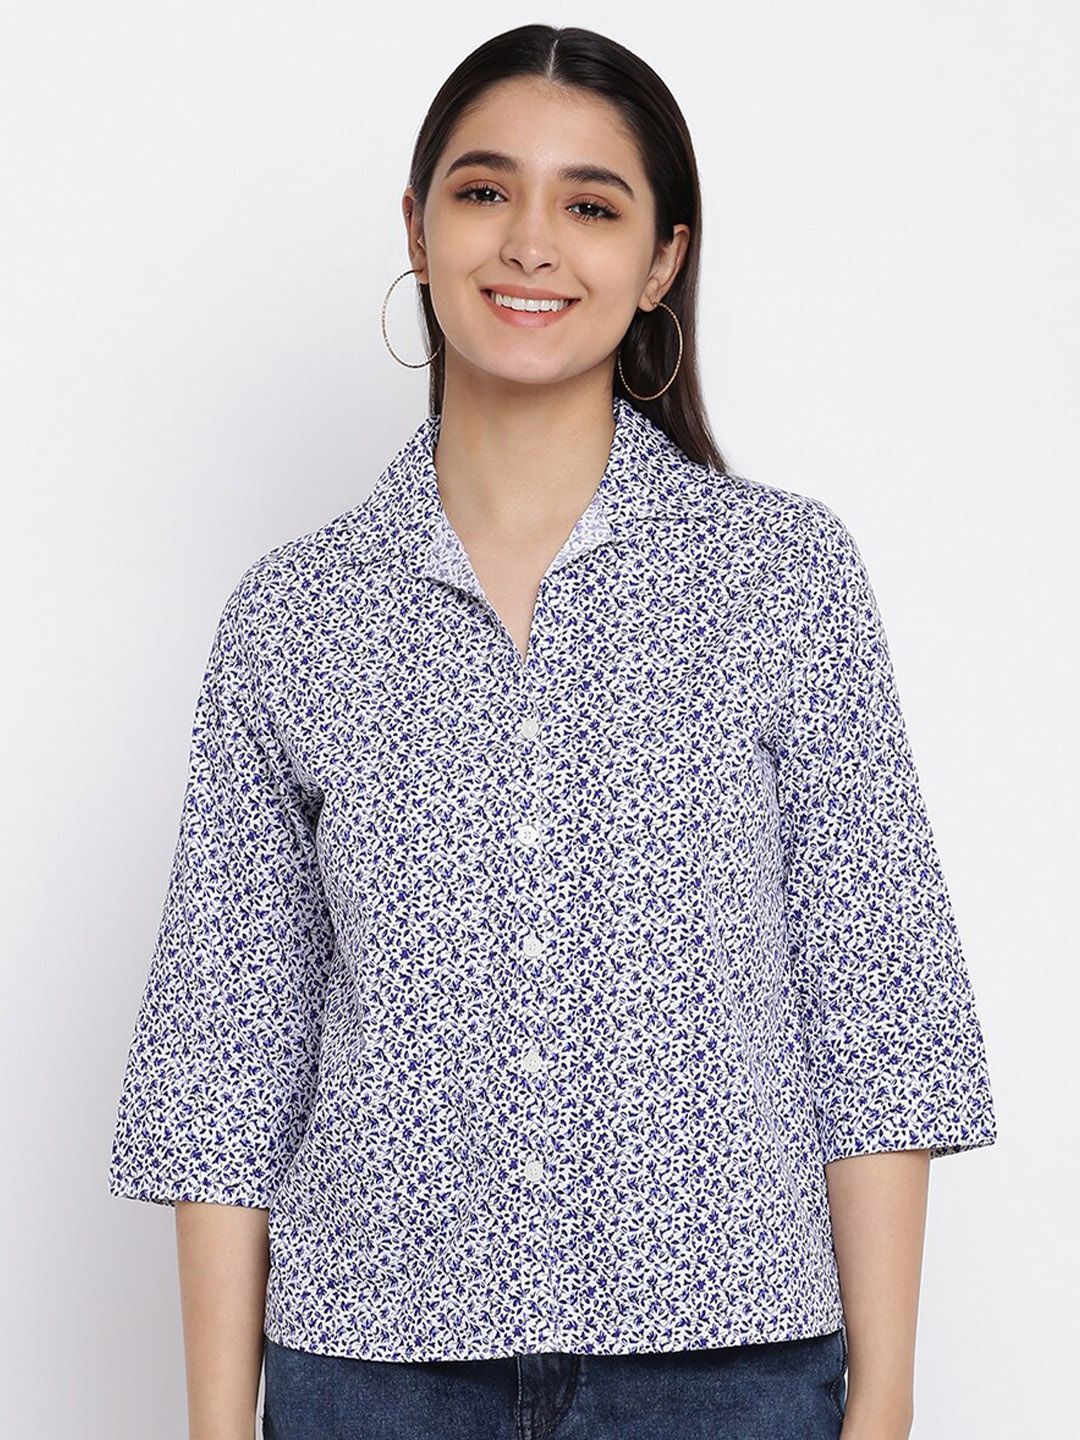 abof Off White Floral Print Shirt Style Top Price in India